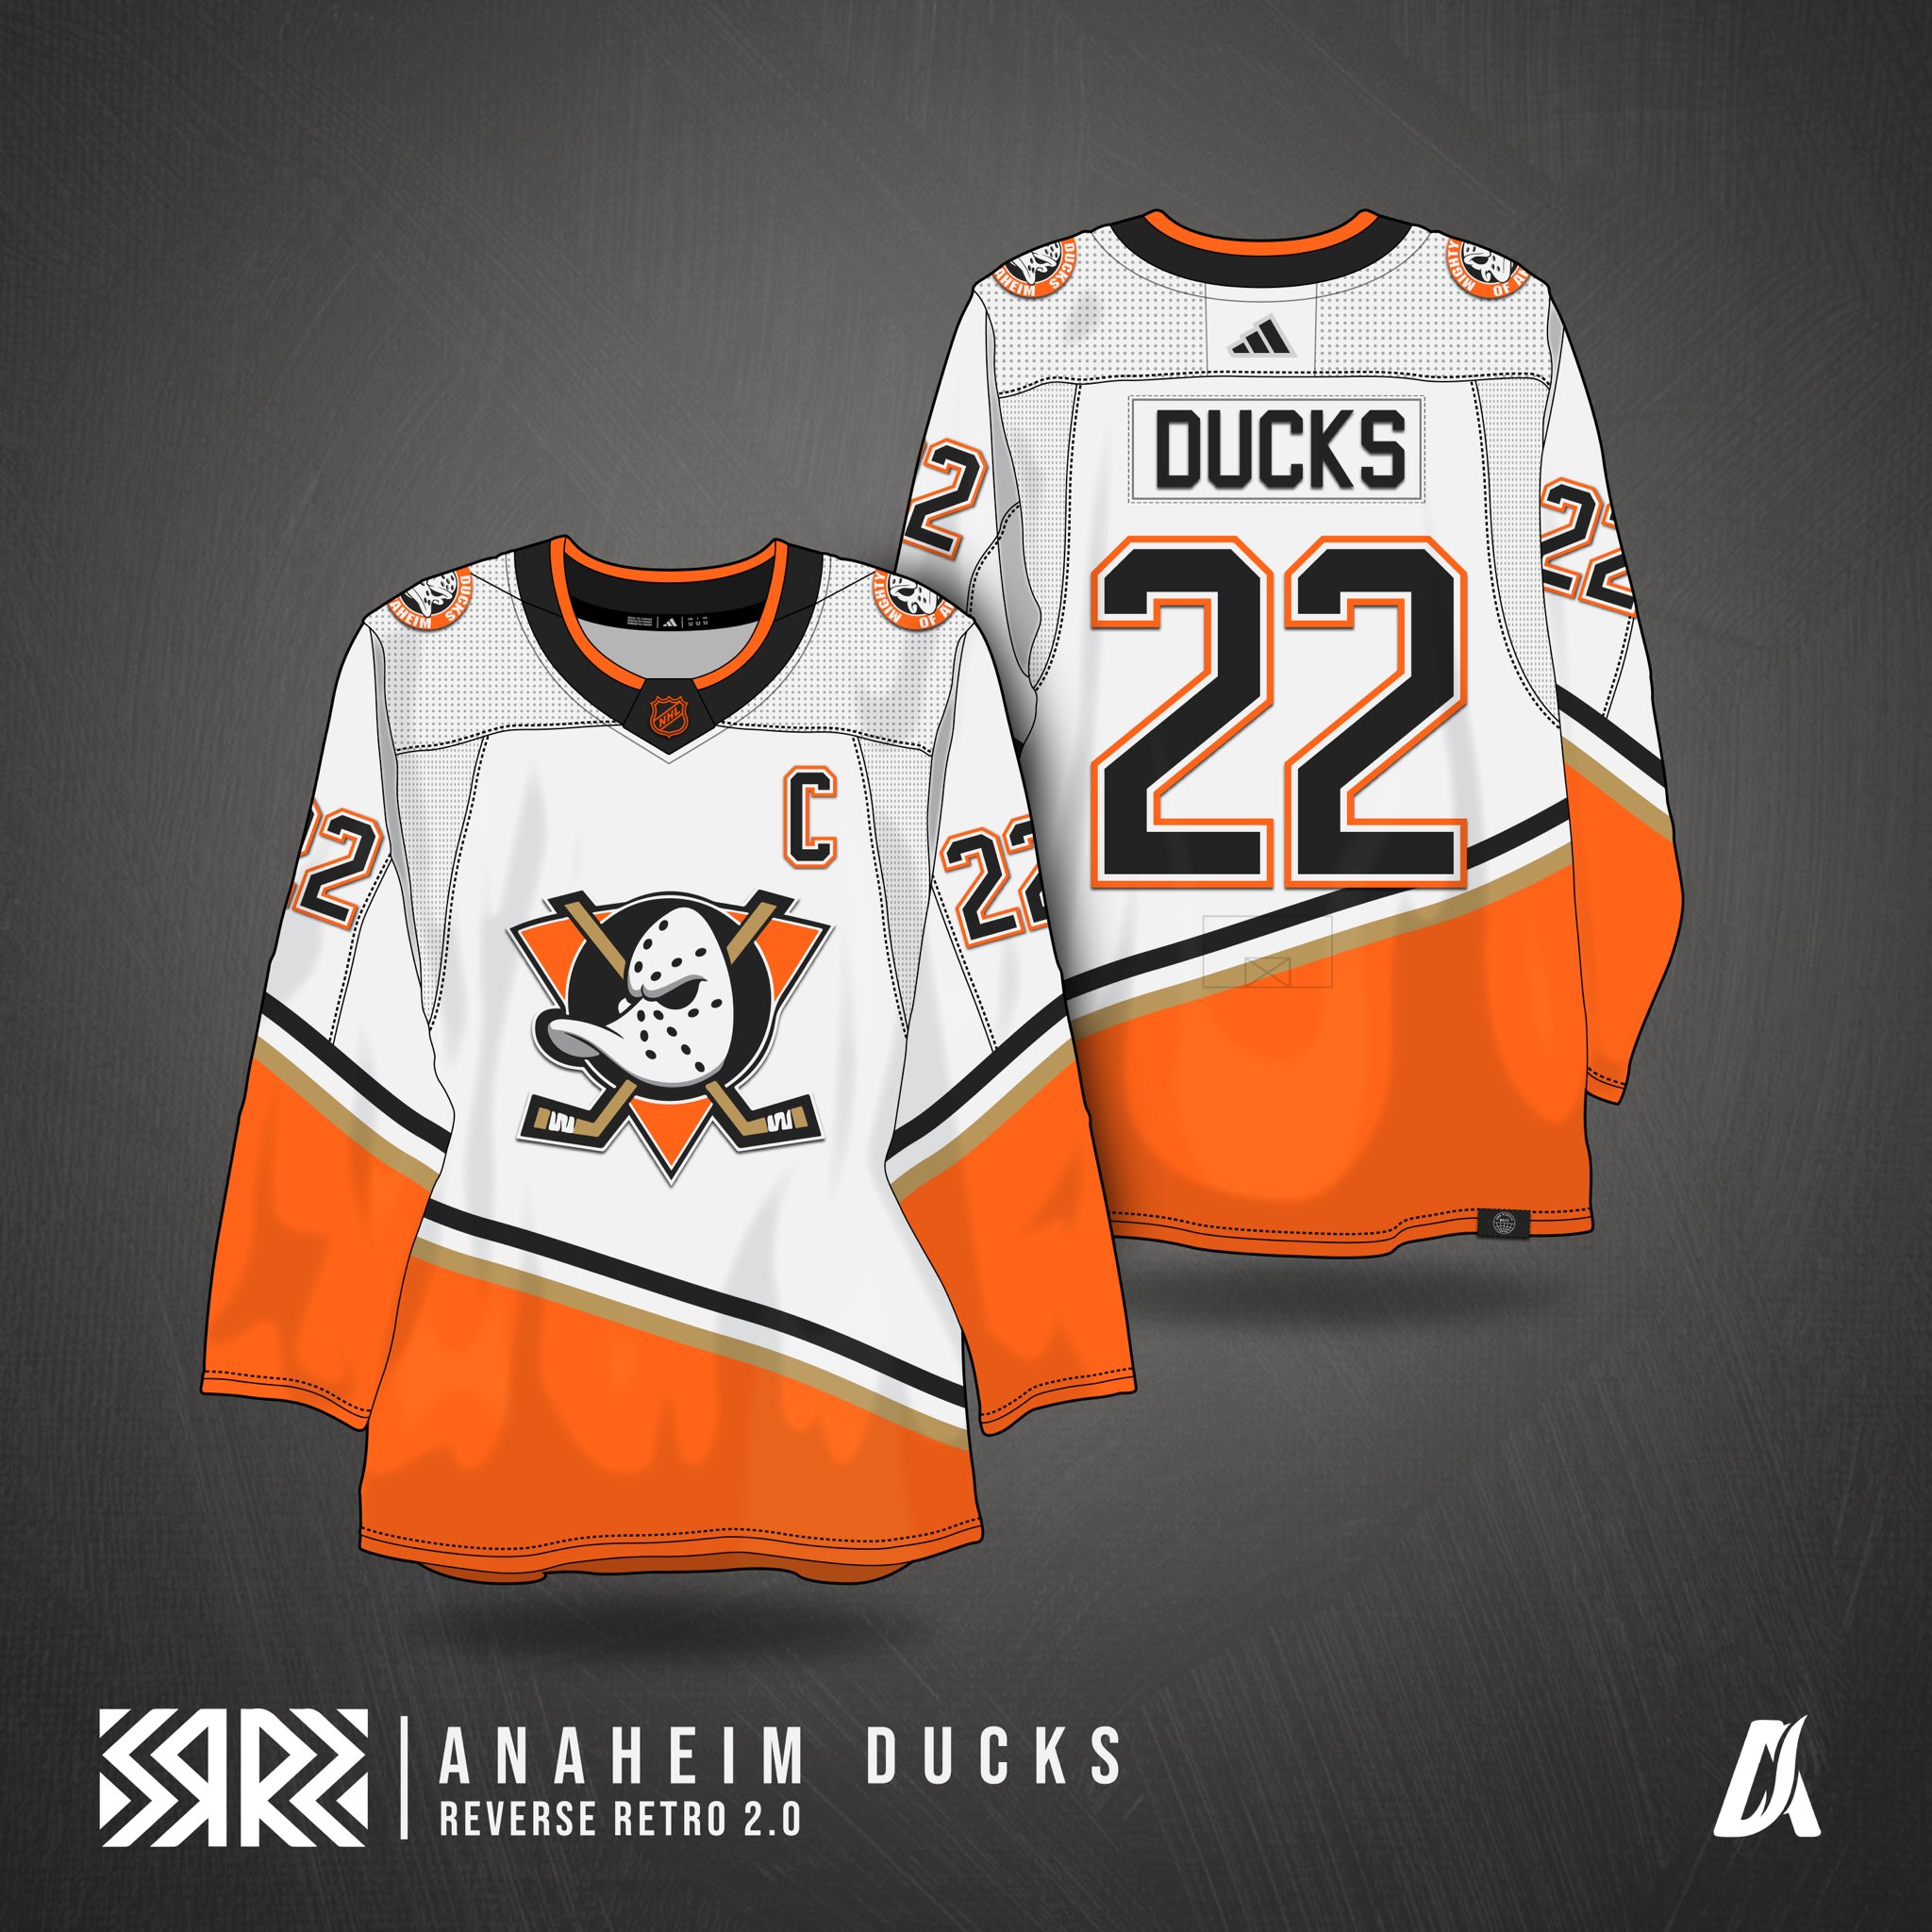 Reverse Retro 3.0 concept inspired by the movie : r/AnaheimDucks